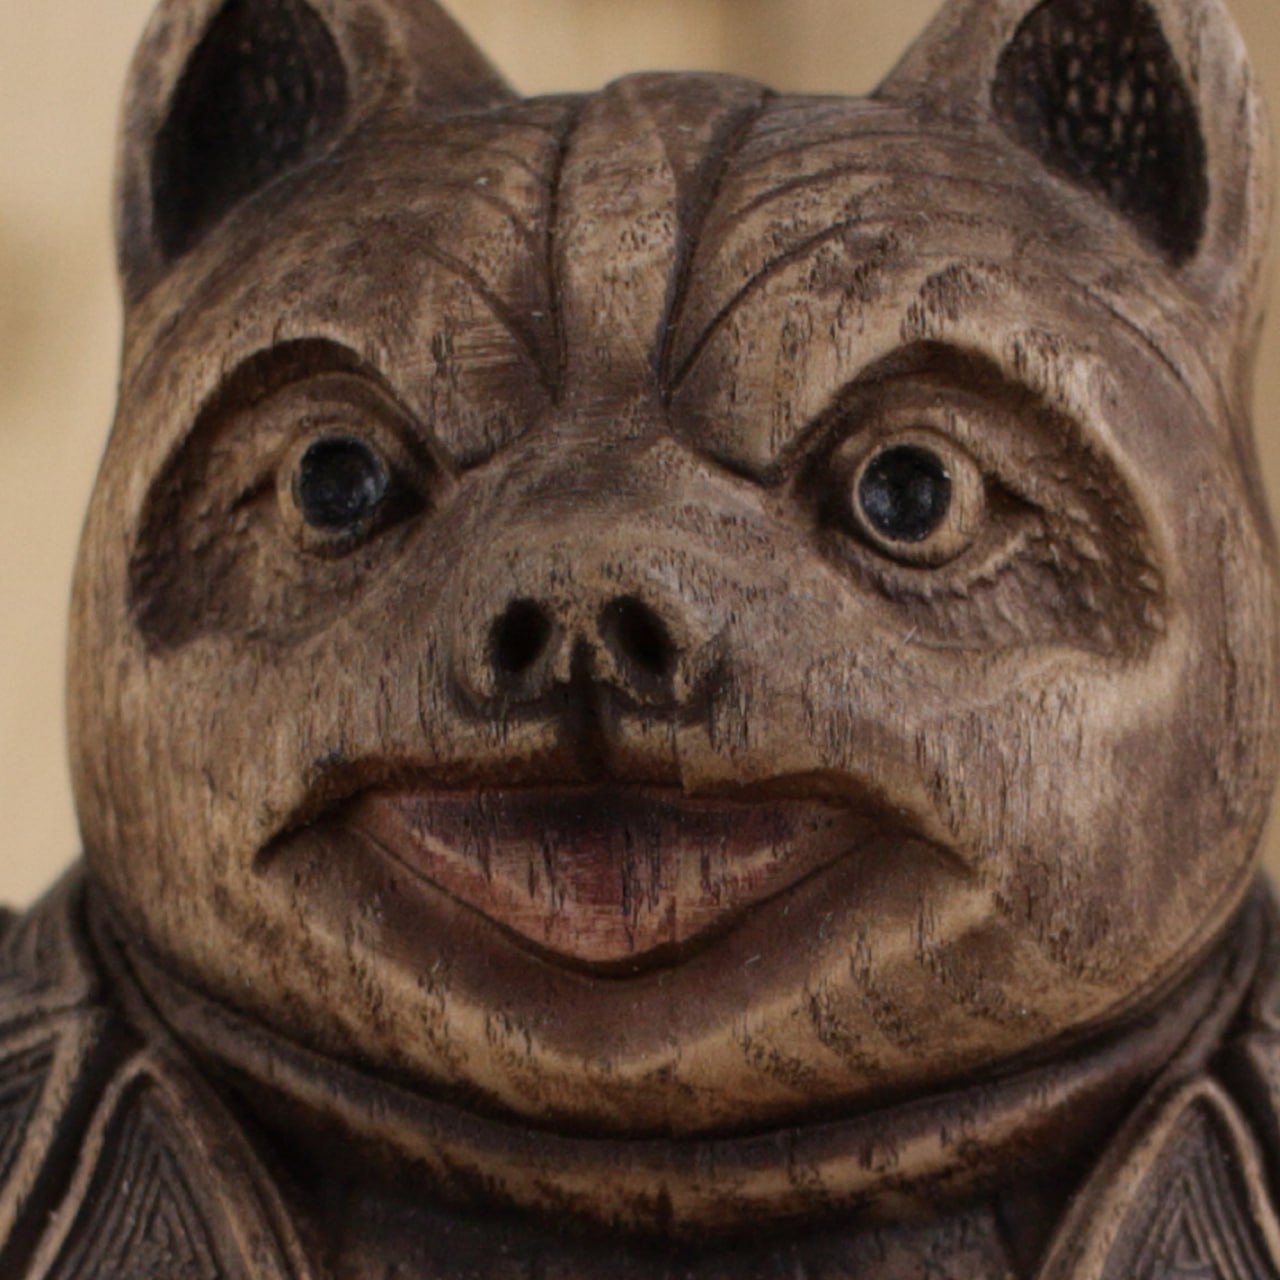 Tanuki Statue - A Charming Wooden Carved Symbol of Luck and Happiness